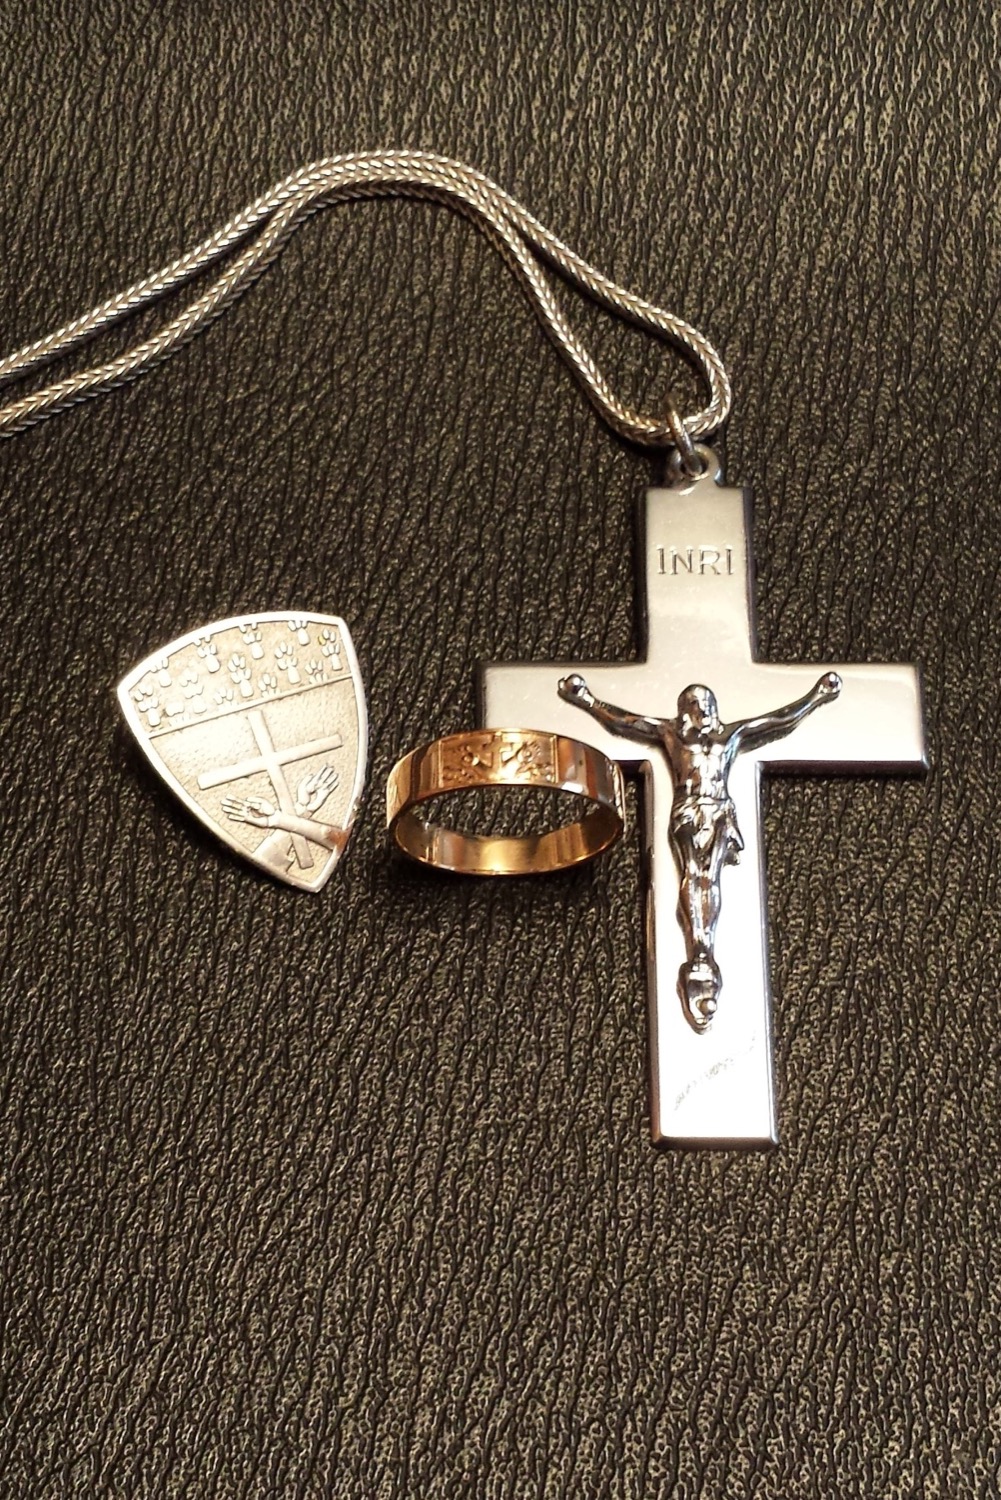 All of our Sisters wear the community ring and the community crucifix or emblem as signs of membership in our Congregation.